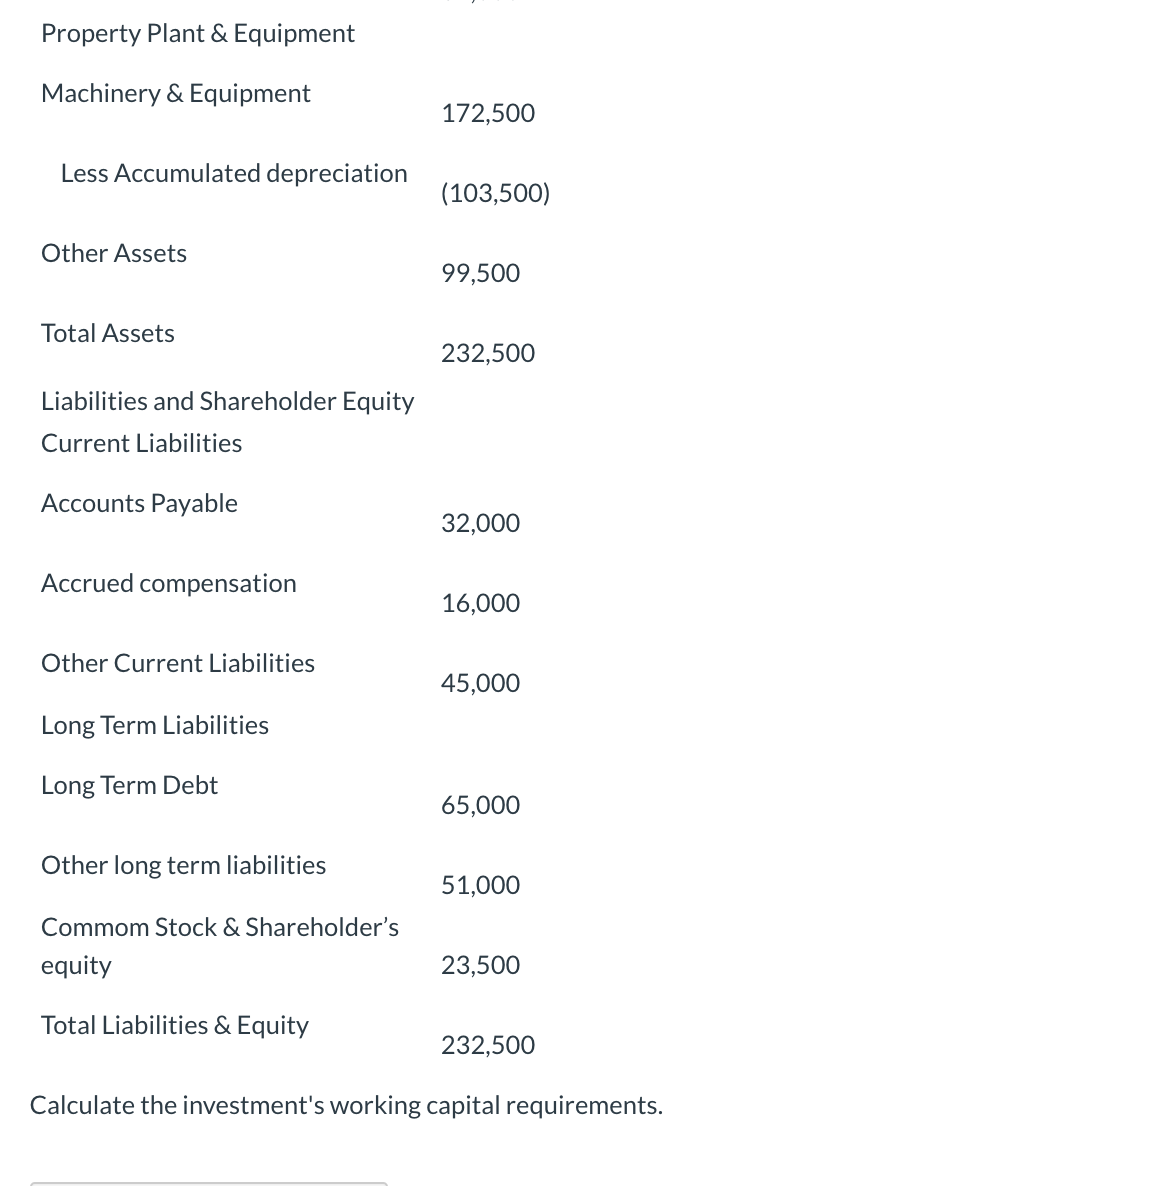 Property Plant & Equipment
Machinery & Equipment
172,500
Less Accumulated depreciation
(103,500)
Other Assets
99,500
Total Assets
232,500
Liabilities and Shareholder Equity
Current Liabilities
Accounts Payable
32,000
Accrued compensation
16,000
Other Current Liabilities
45,000
Long Term Liabilities
Long Term Debt
65,000
Other long term liabilities
51,000
Commom Stock & Shareholder's
equity
23,500
Total Liabilities & Equity
232,500
Calculate the investment's working capital requirements.
